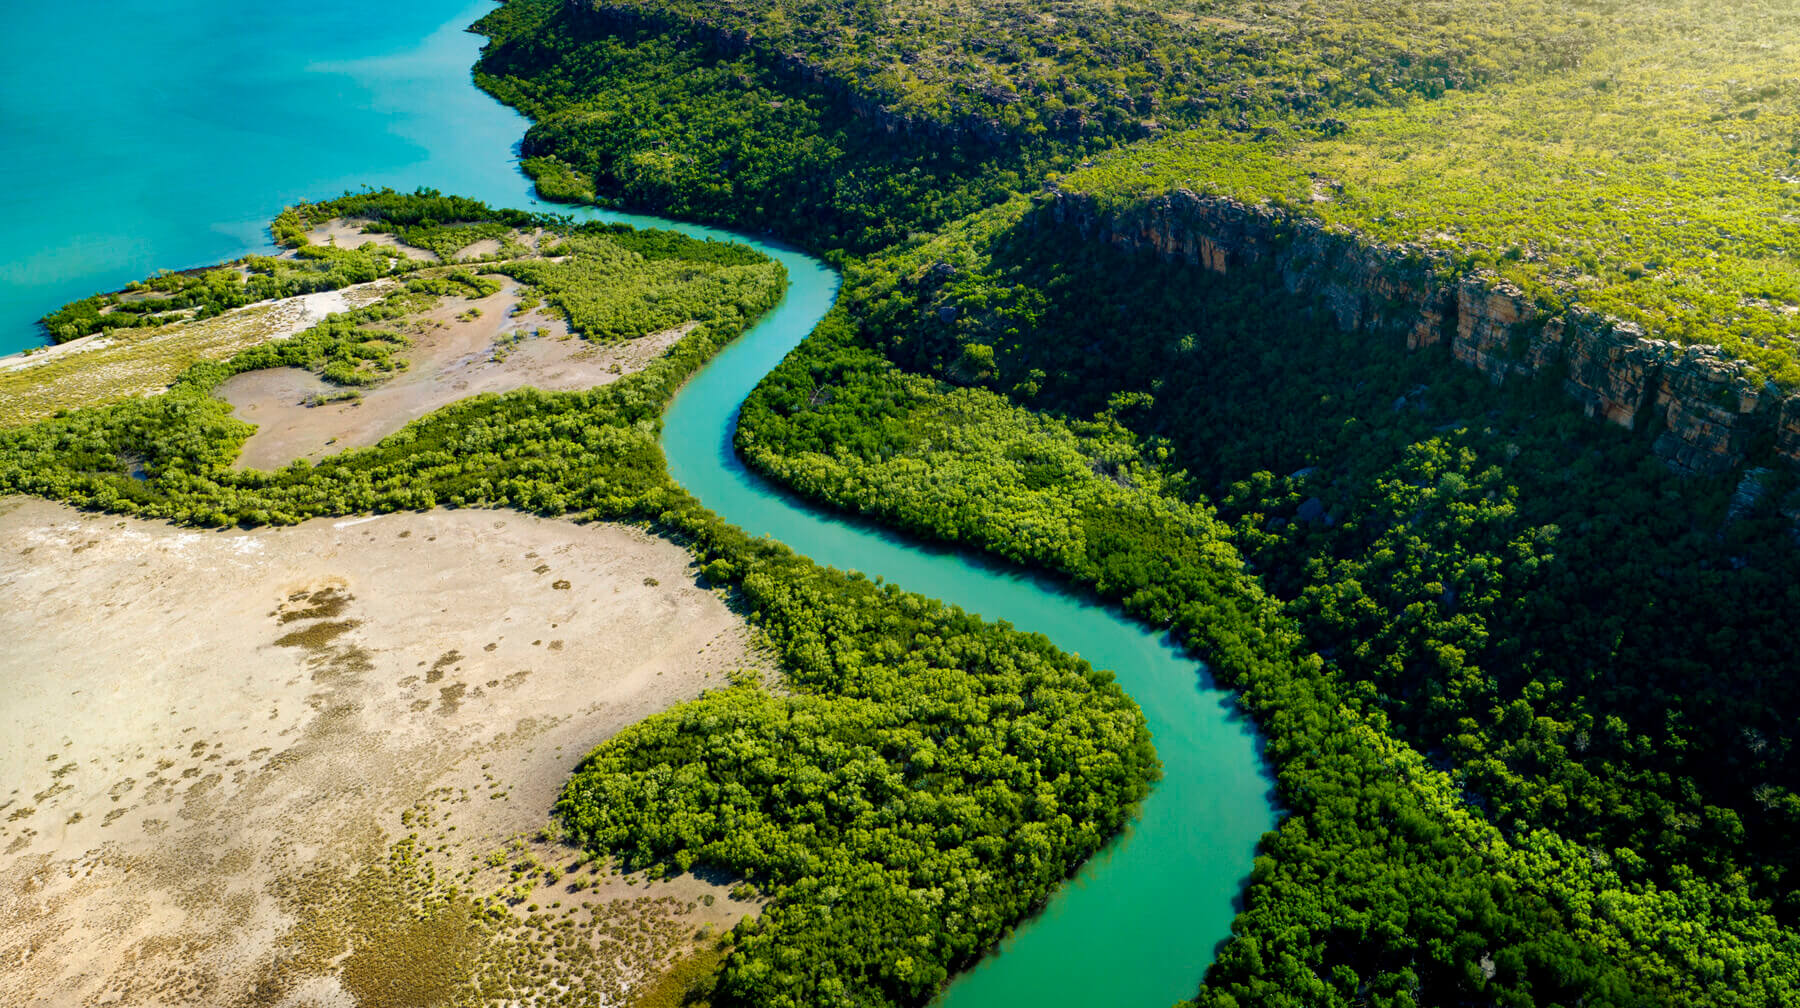 Aerial view of a Kimberley river and tree lined banks